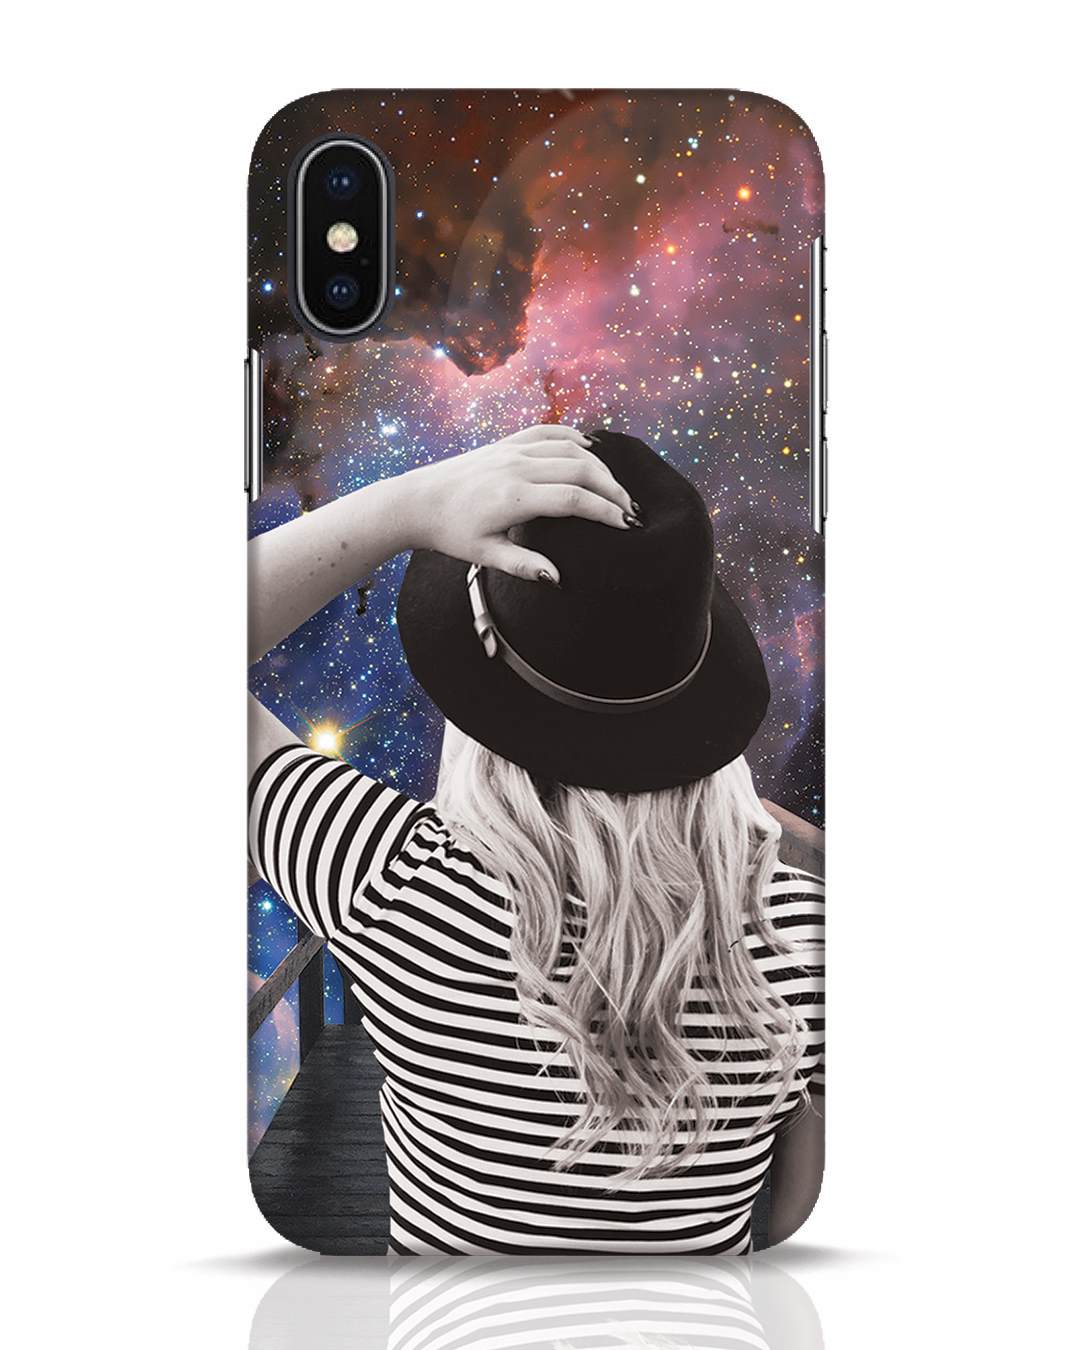 Space Time iPhone X Mobile Cover iPhone X Mobile Covers Bewakoof.com